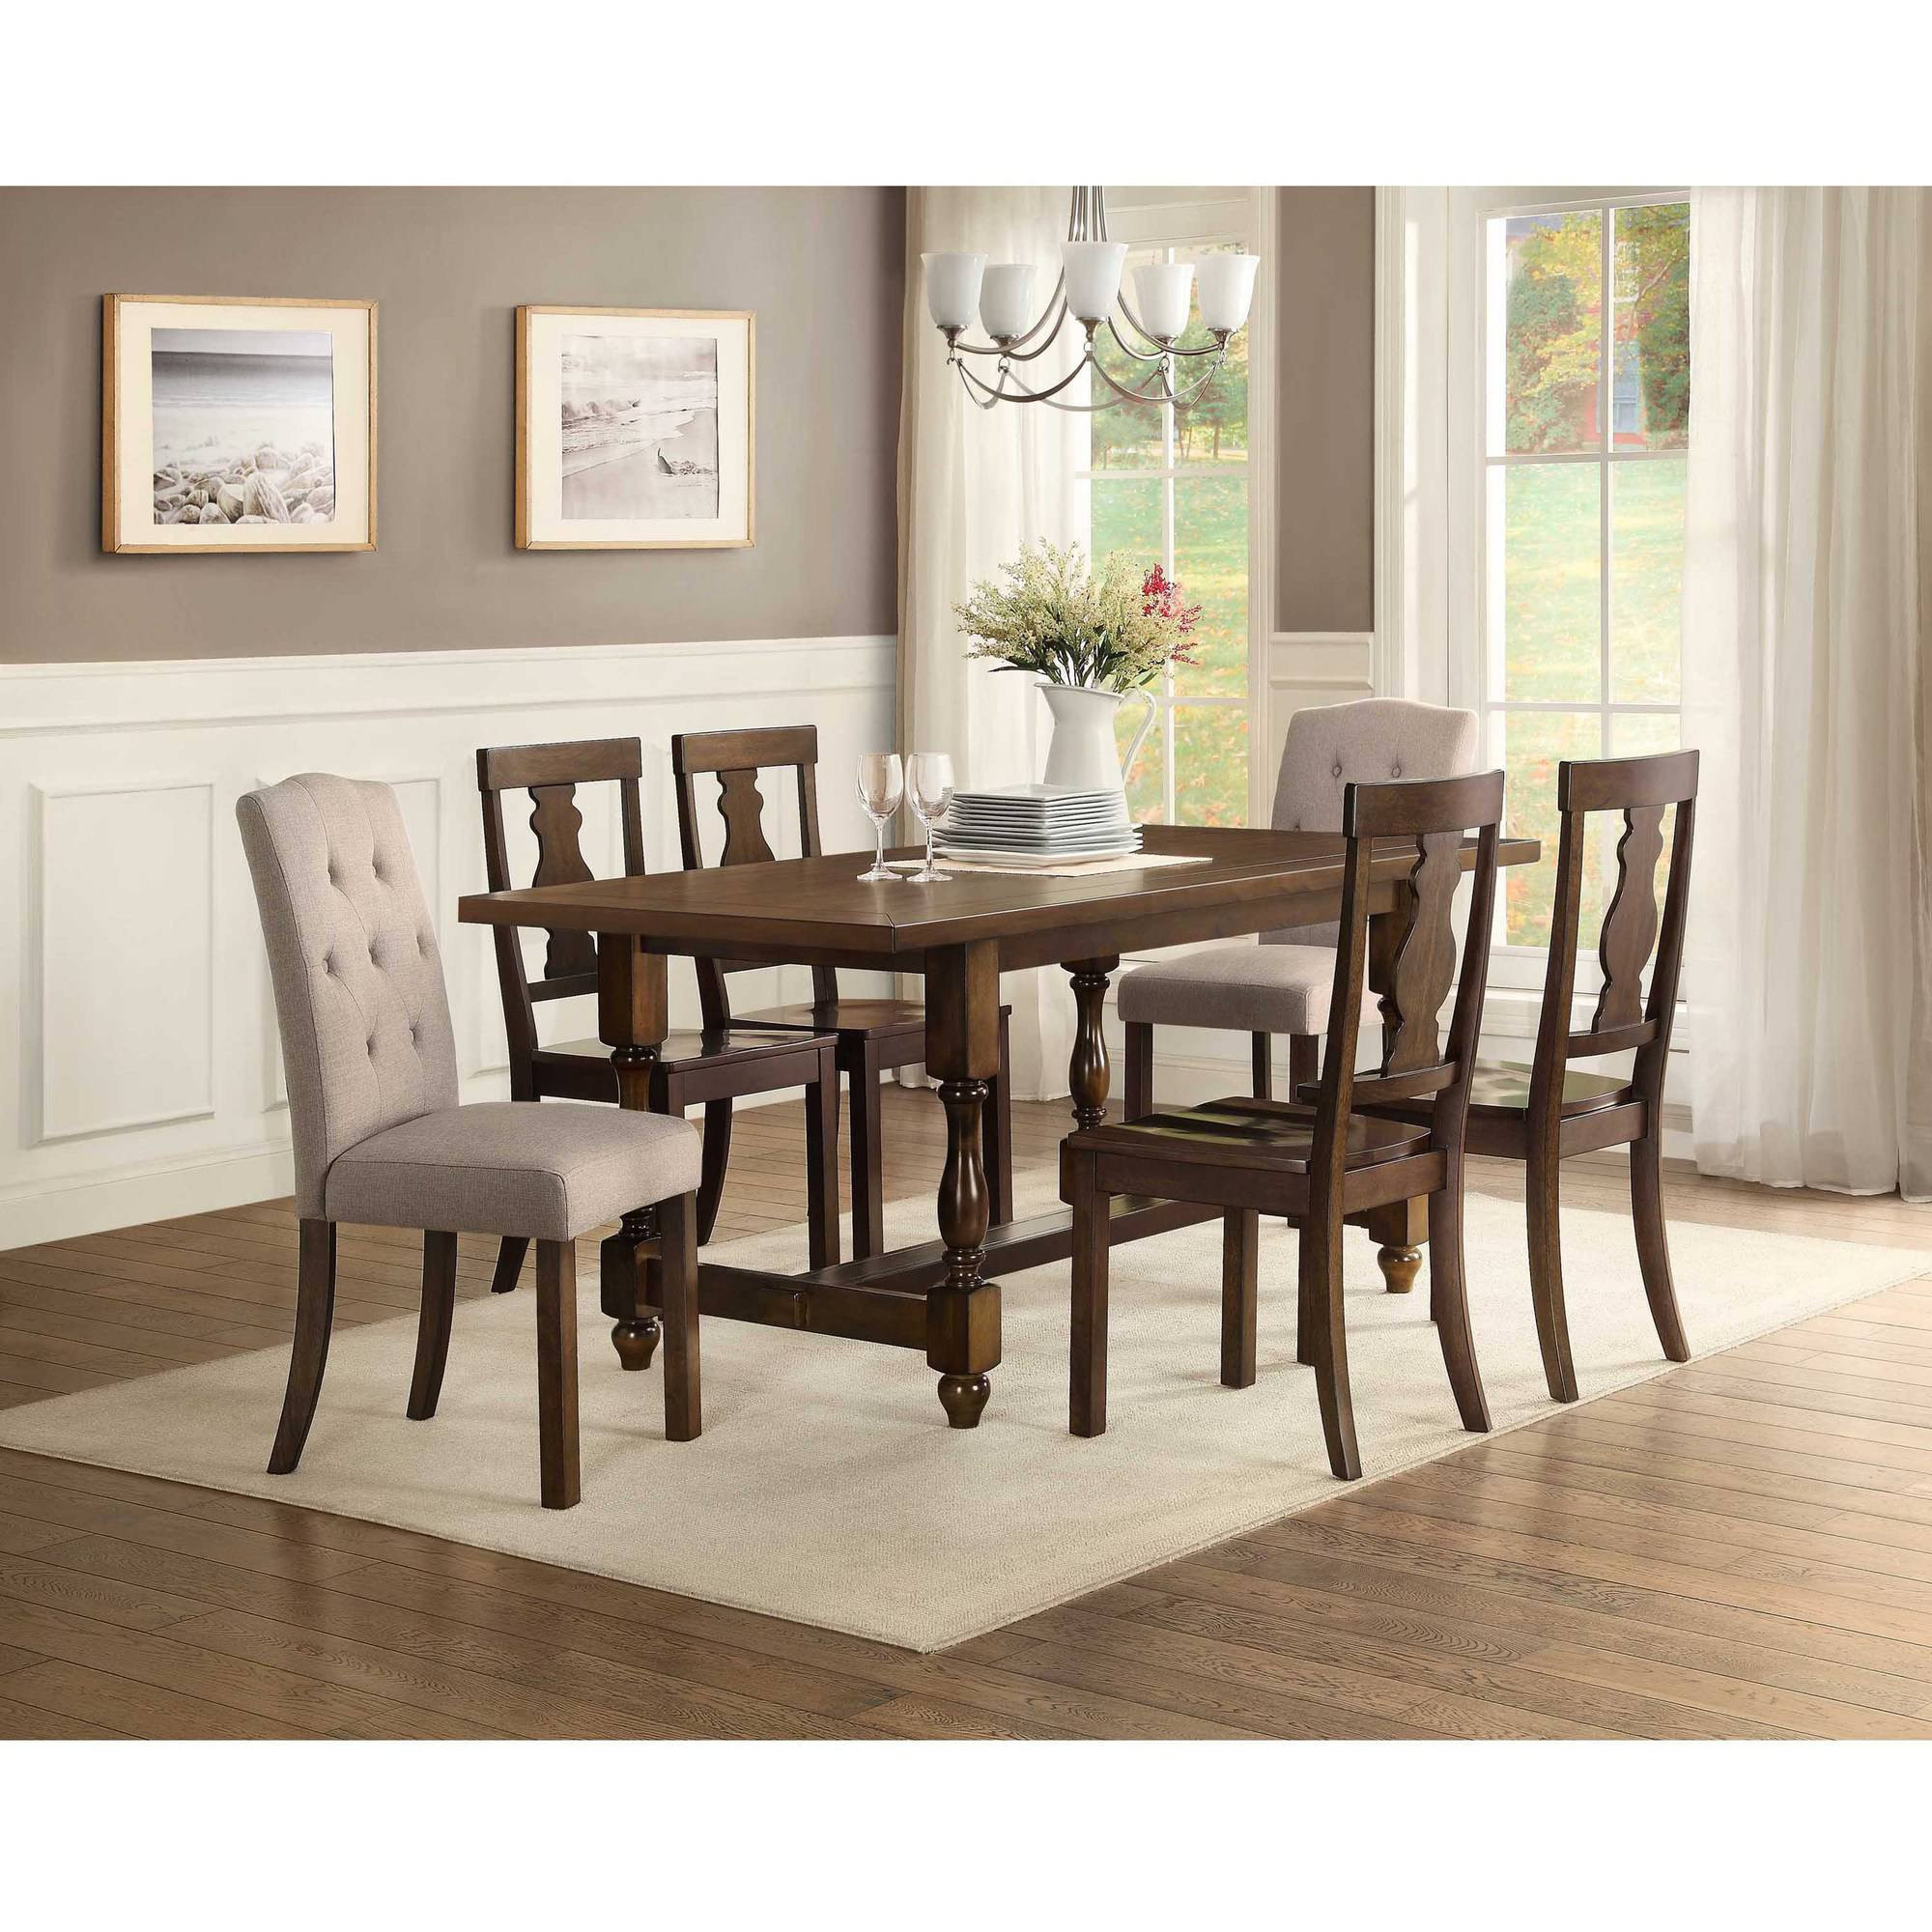 Small Kitchen Table And Chairs
 Small Kitchen Table with Two Chairs Walmart